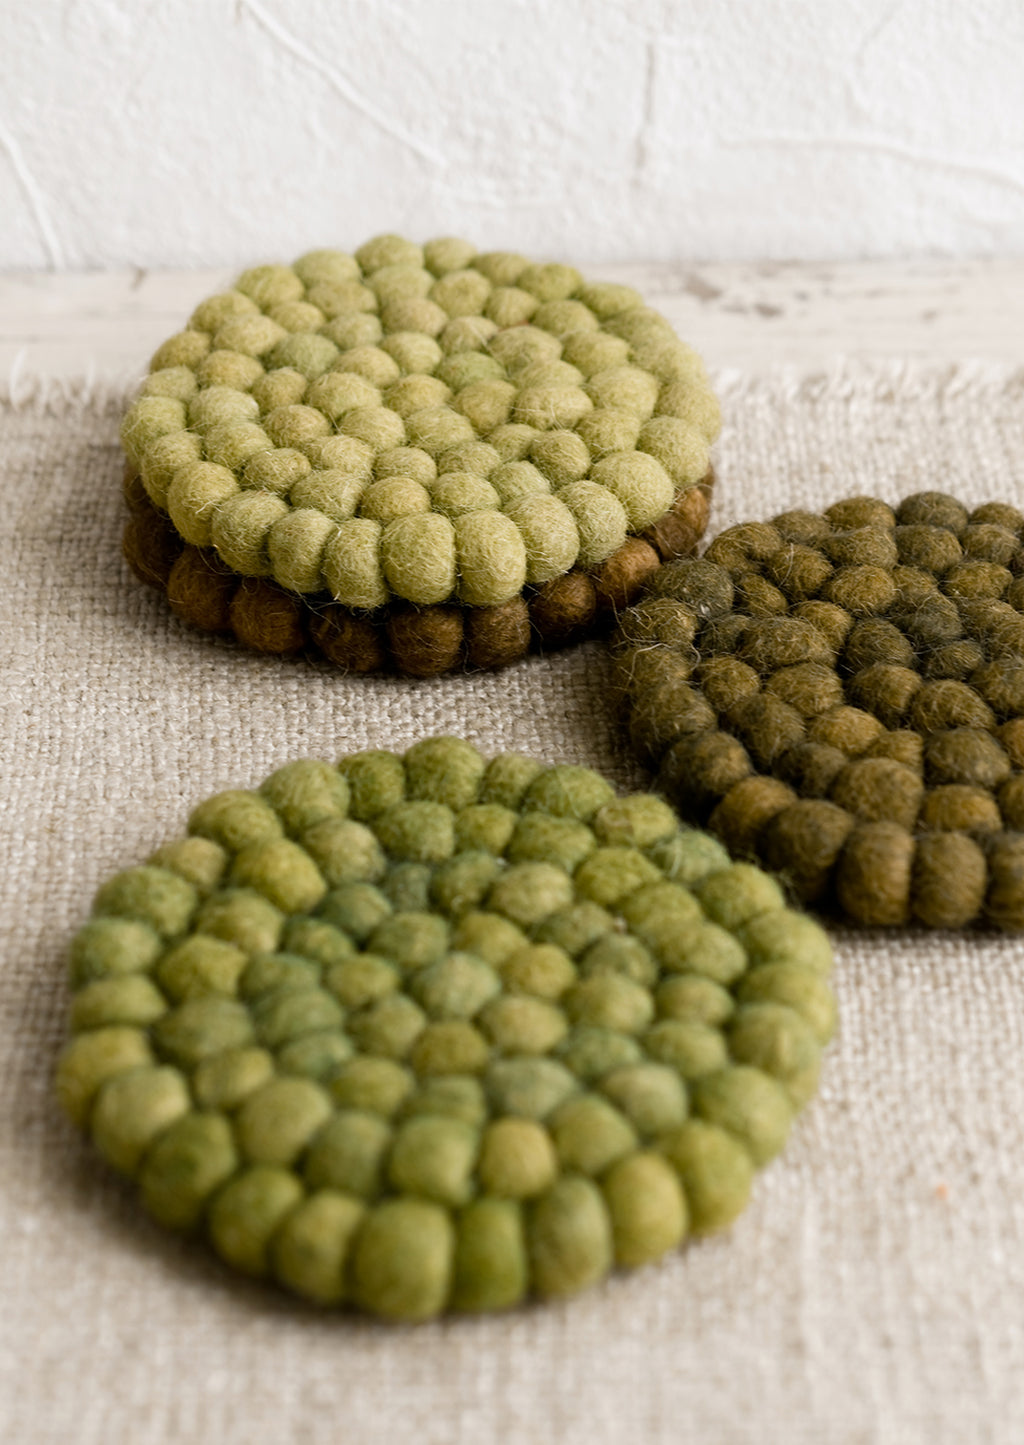 2: A set of felted ball coasters in mixed tones of green.